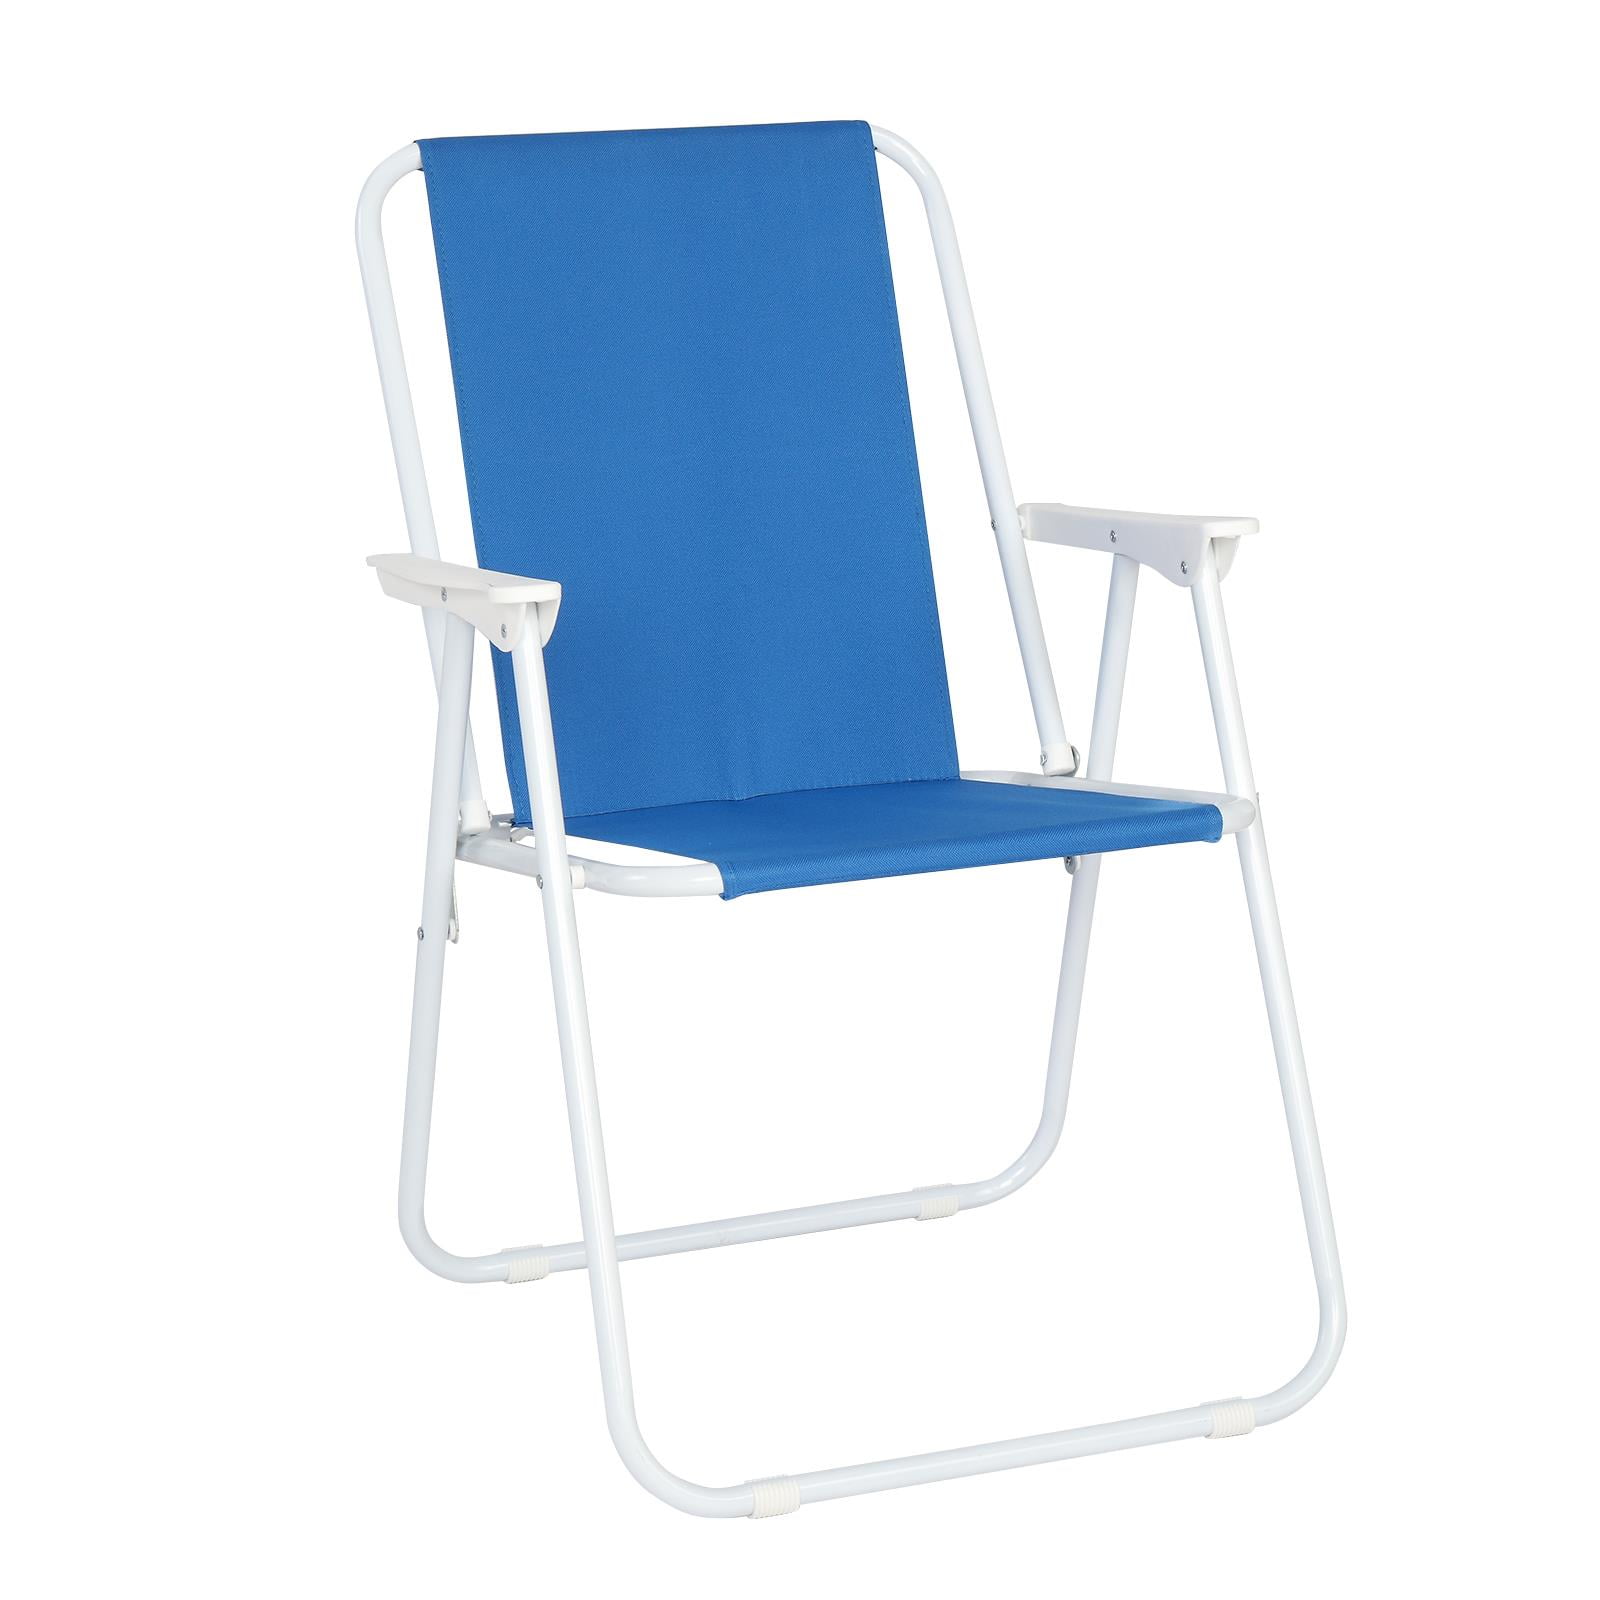 BaytoCare Portable Beach Chair Folding Solid Construction Camping ...